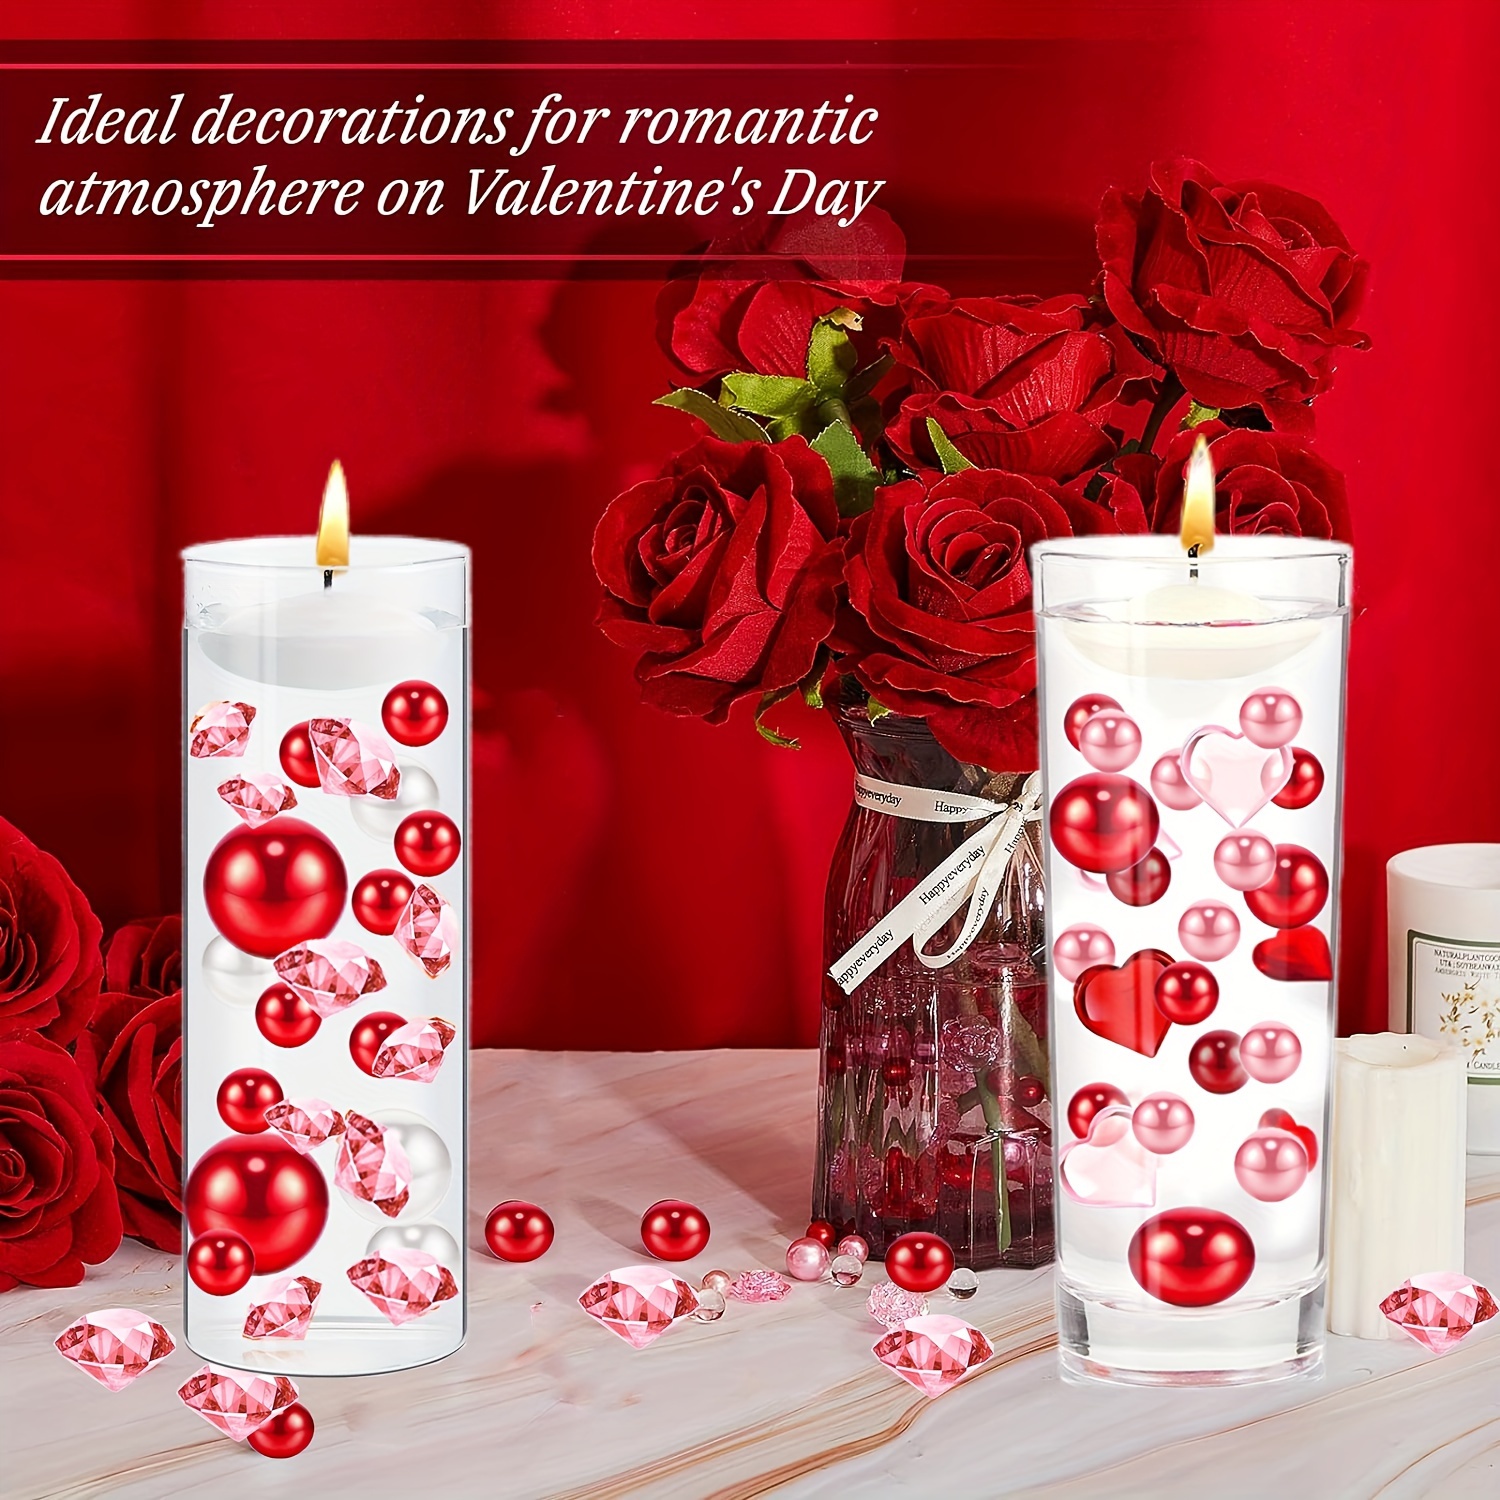 Chiccall Valentine's Day Decor 6076Pcs Vase Filler Heart Pearl Water Gel  Bead Floating Candles Centerpiece For Valentine's Day Wedding Decor 